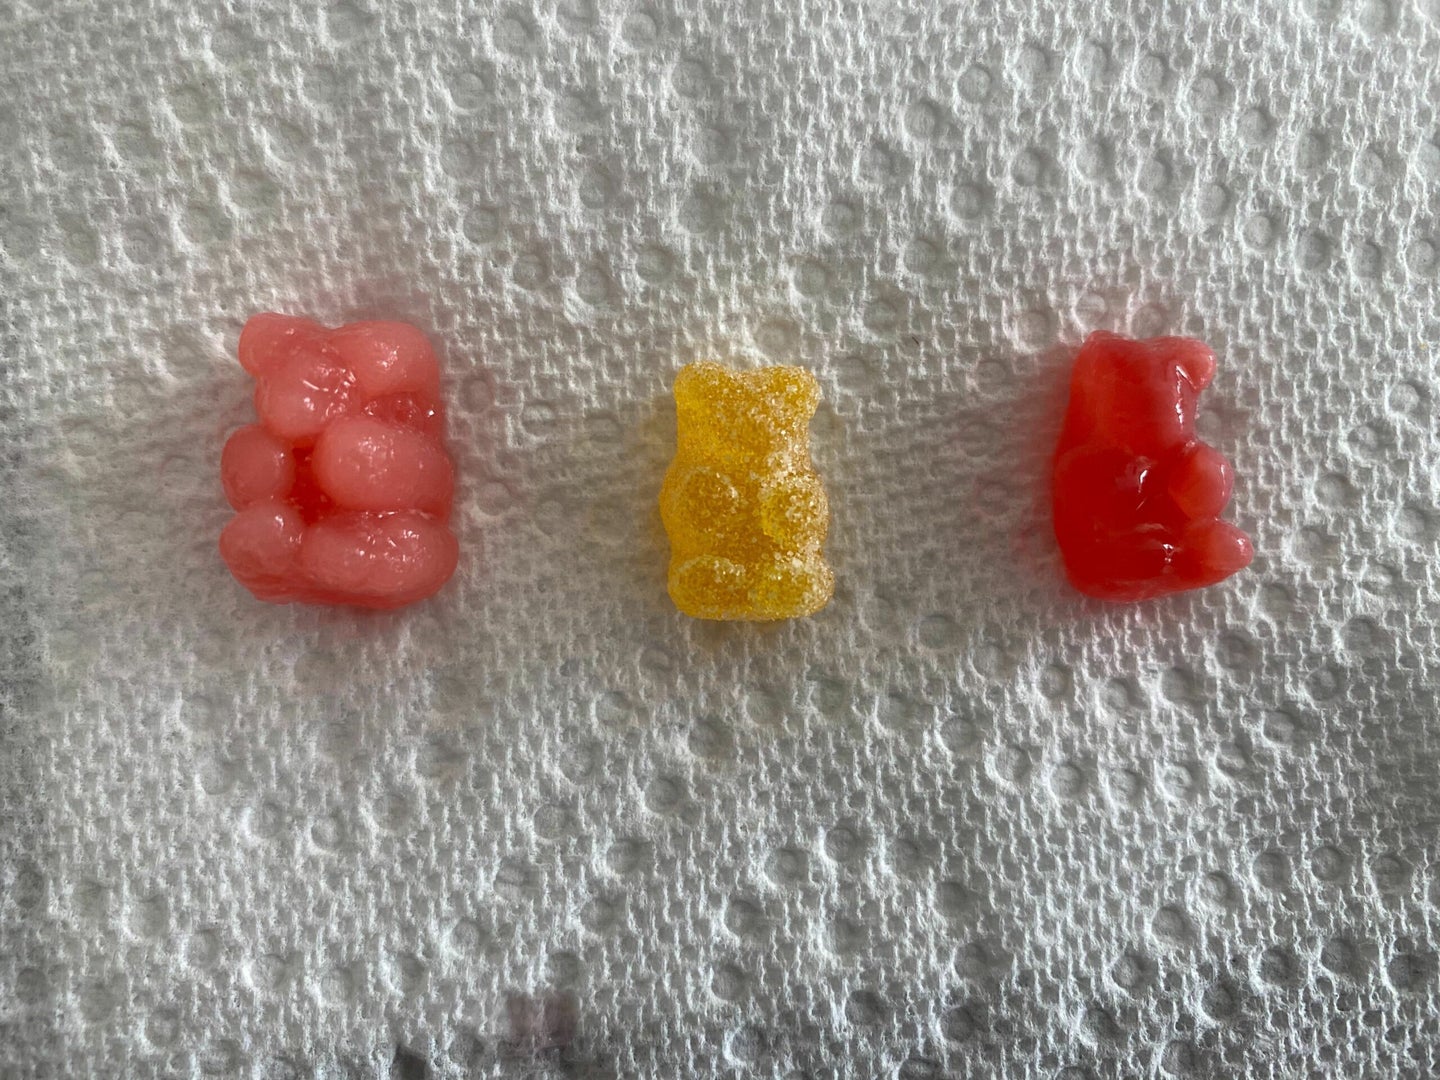 Three gummy bears on a white paper towel